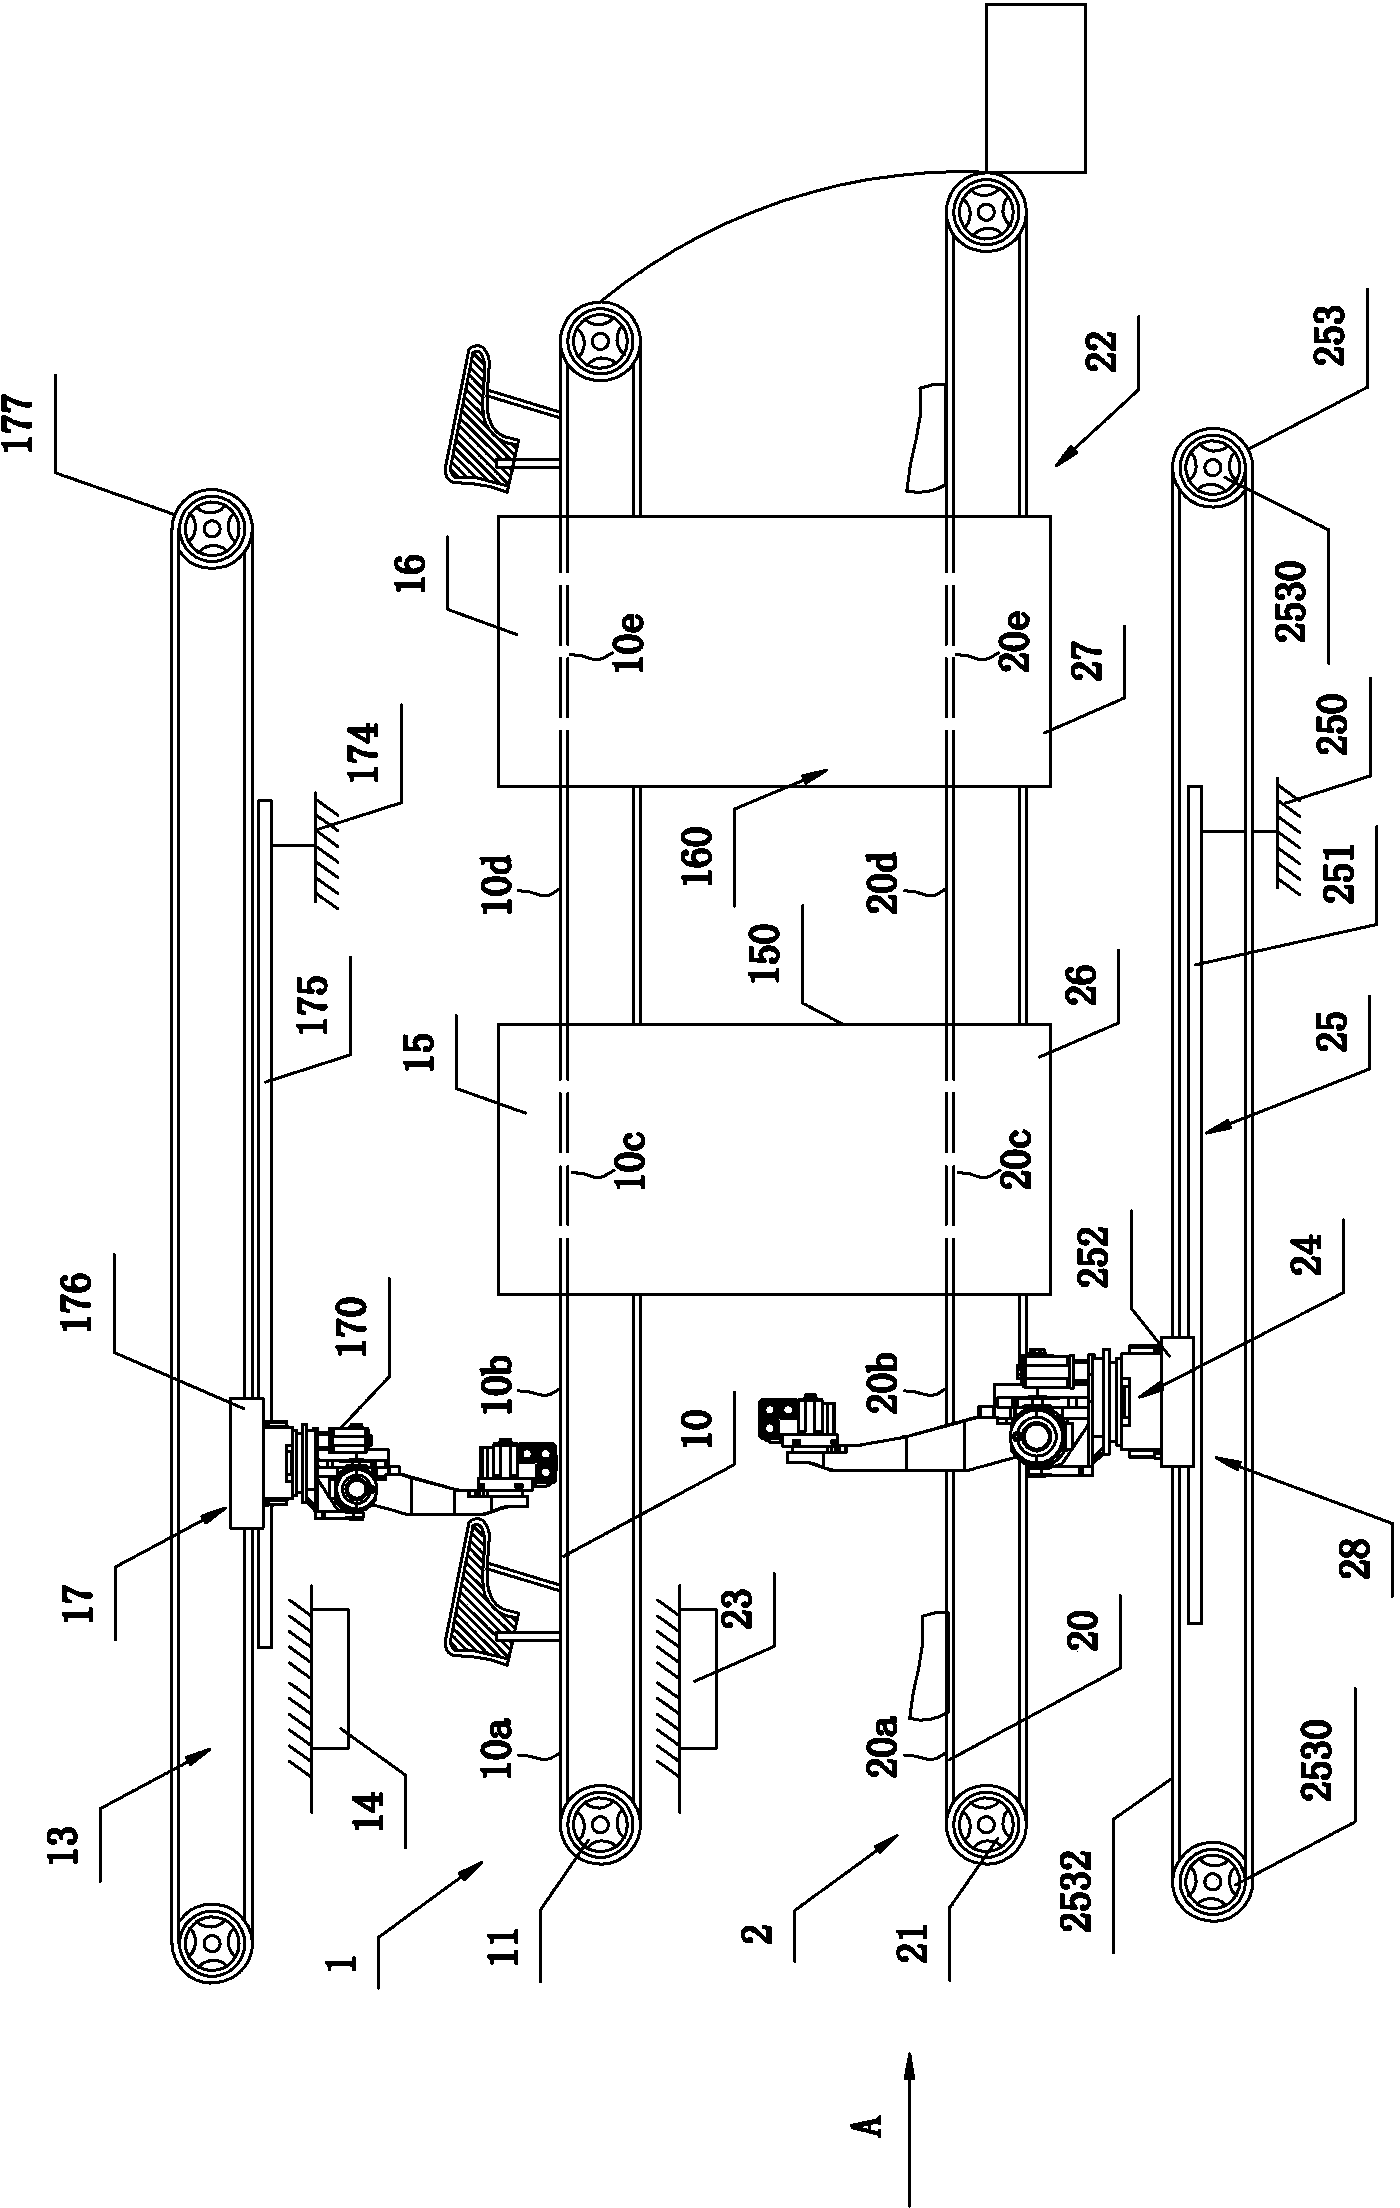 Automatic footwear production line with using space saved and automatic footwear making method